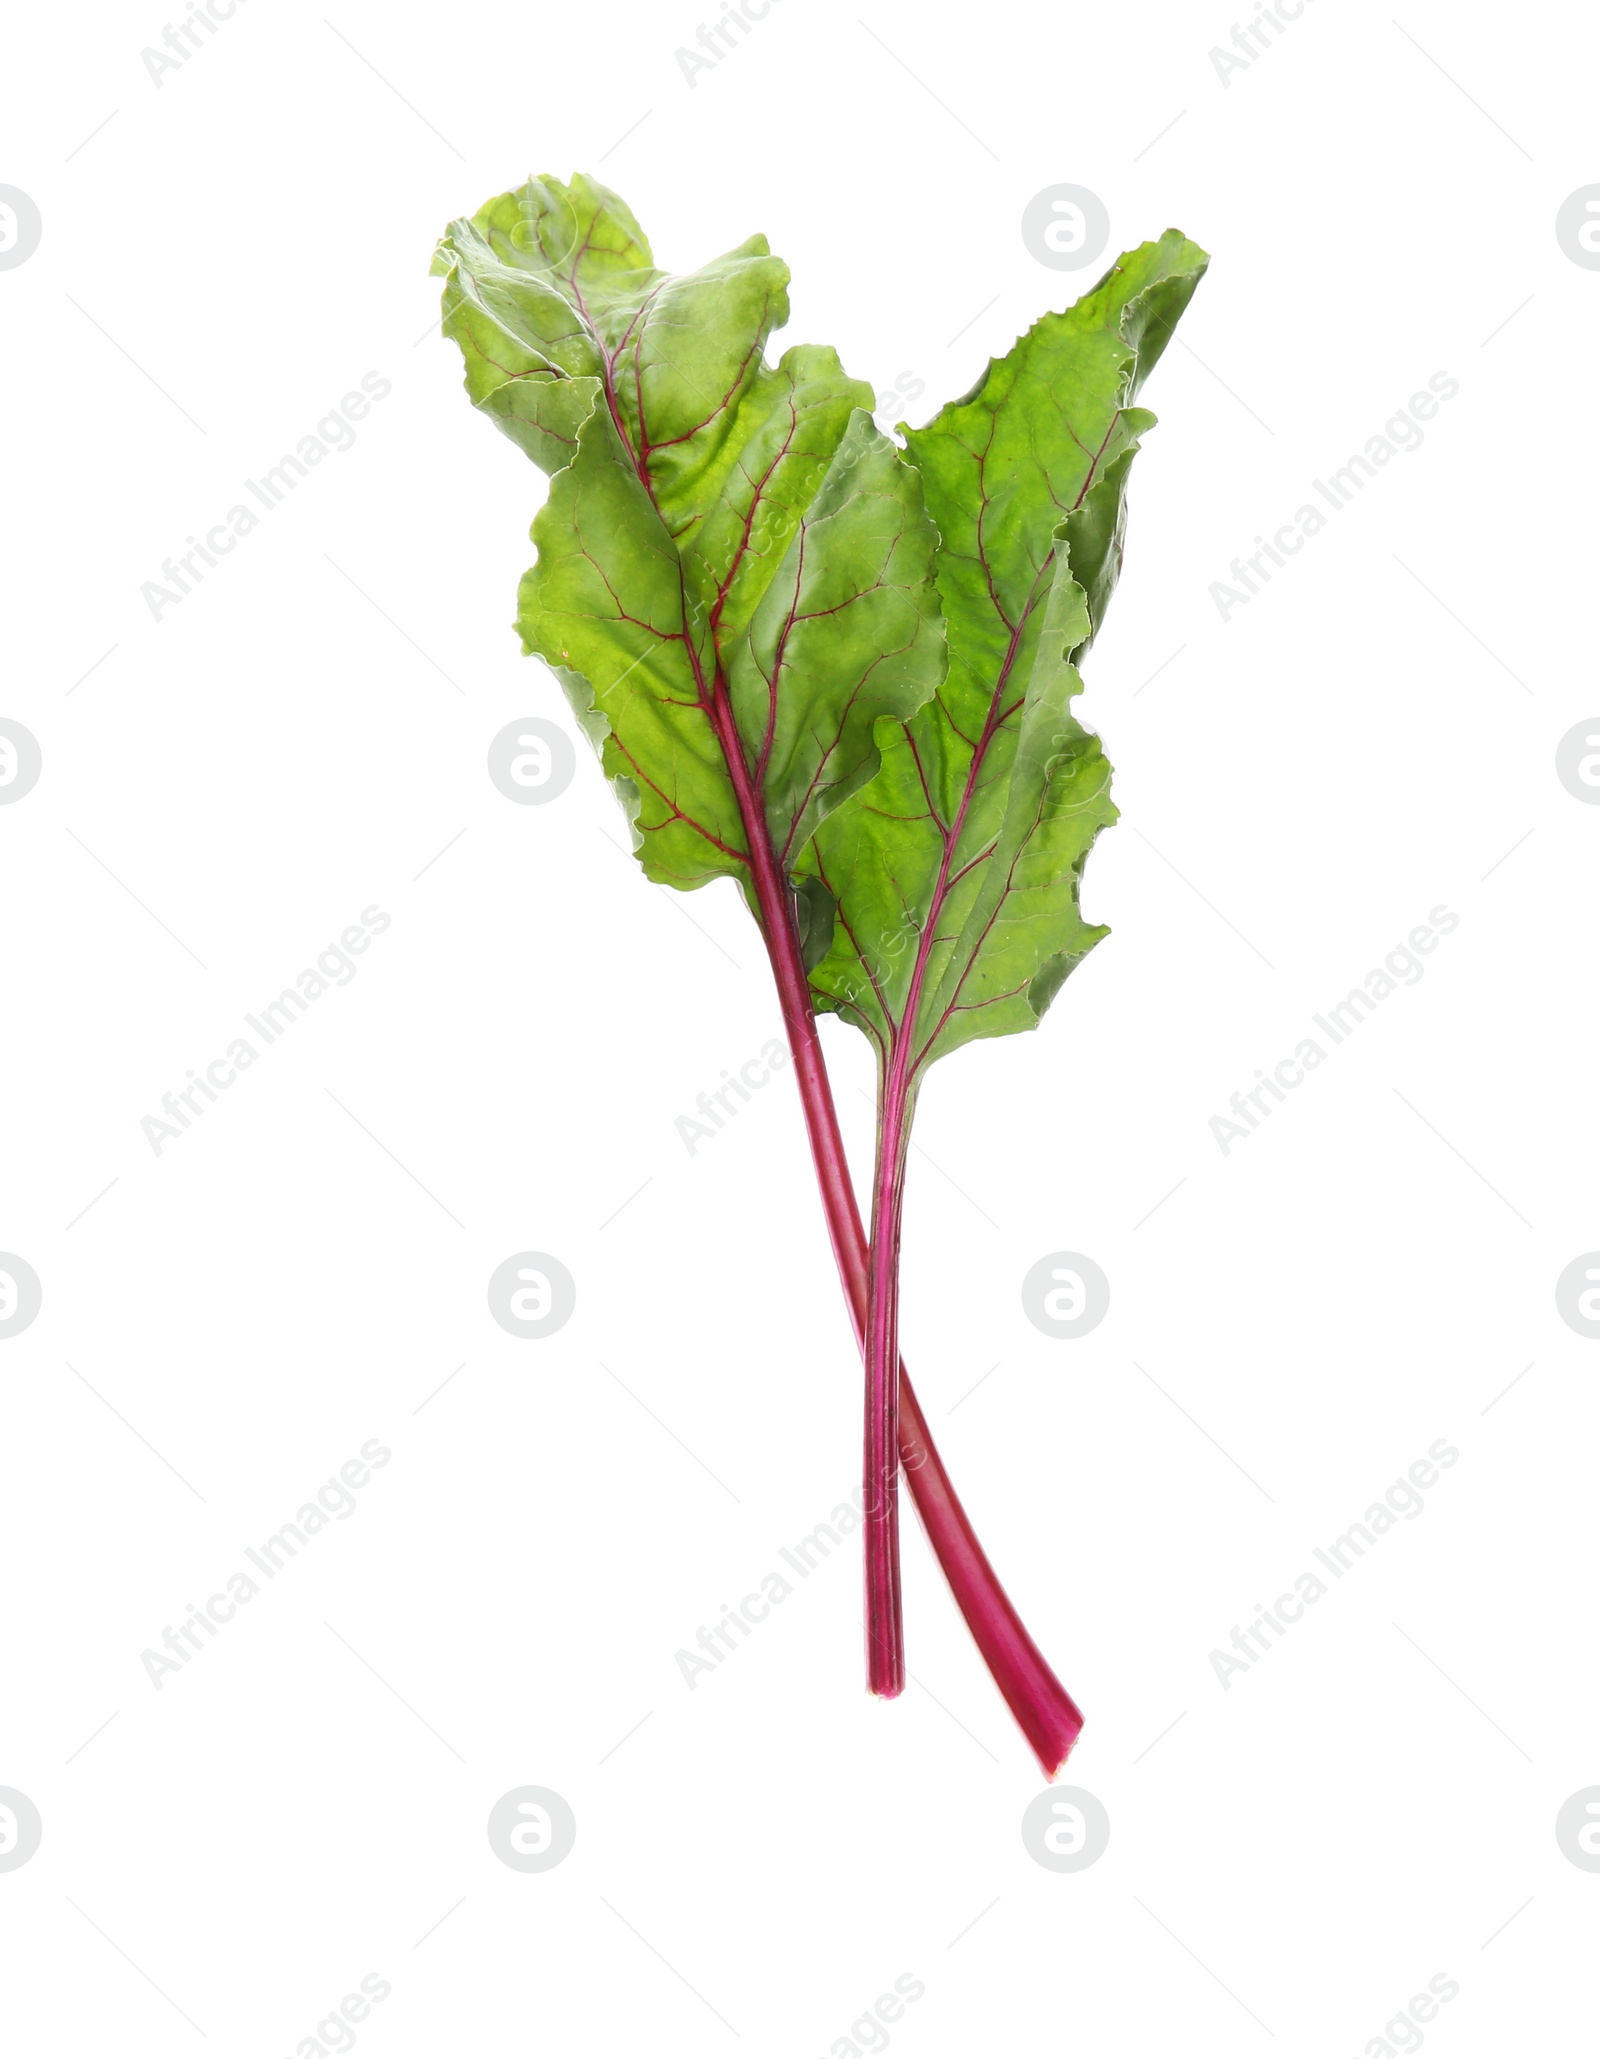 Photo of Leaves of fresh beet on white background